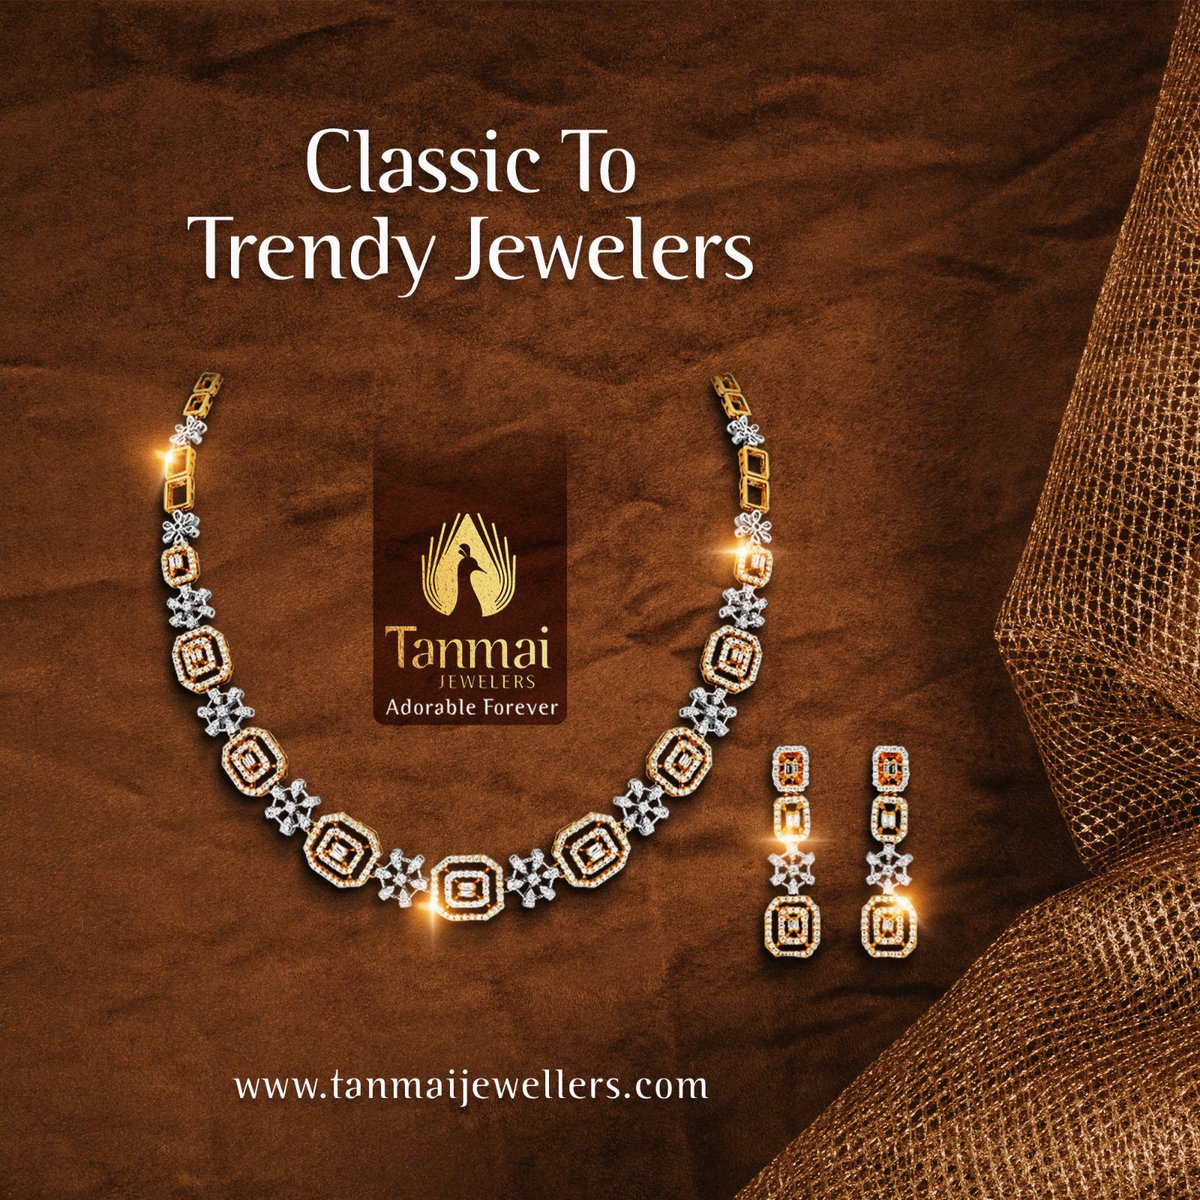 Let our Jewellery be the finishing touch to your perfect look 📷...

Visit Us: 608 S Valley Ranch Pkwy S, Irving, TX 75063, USA

#tanmaijewelers #tanmai #diamonds #jewelery #irving #diamondjewelery #traditionalwear #diamonds #ornaments #elegantjewellery #bracelete #chain #stones